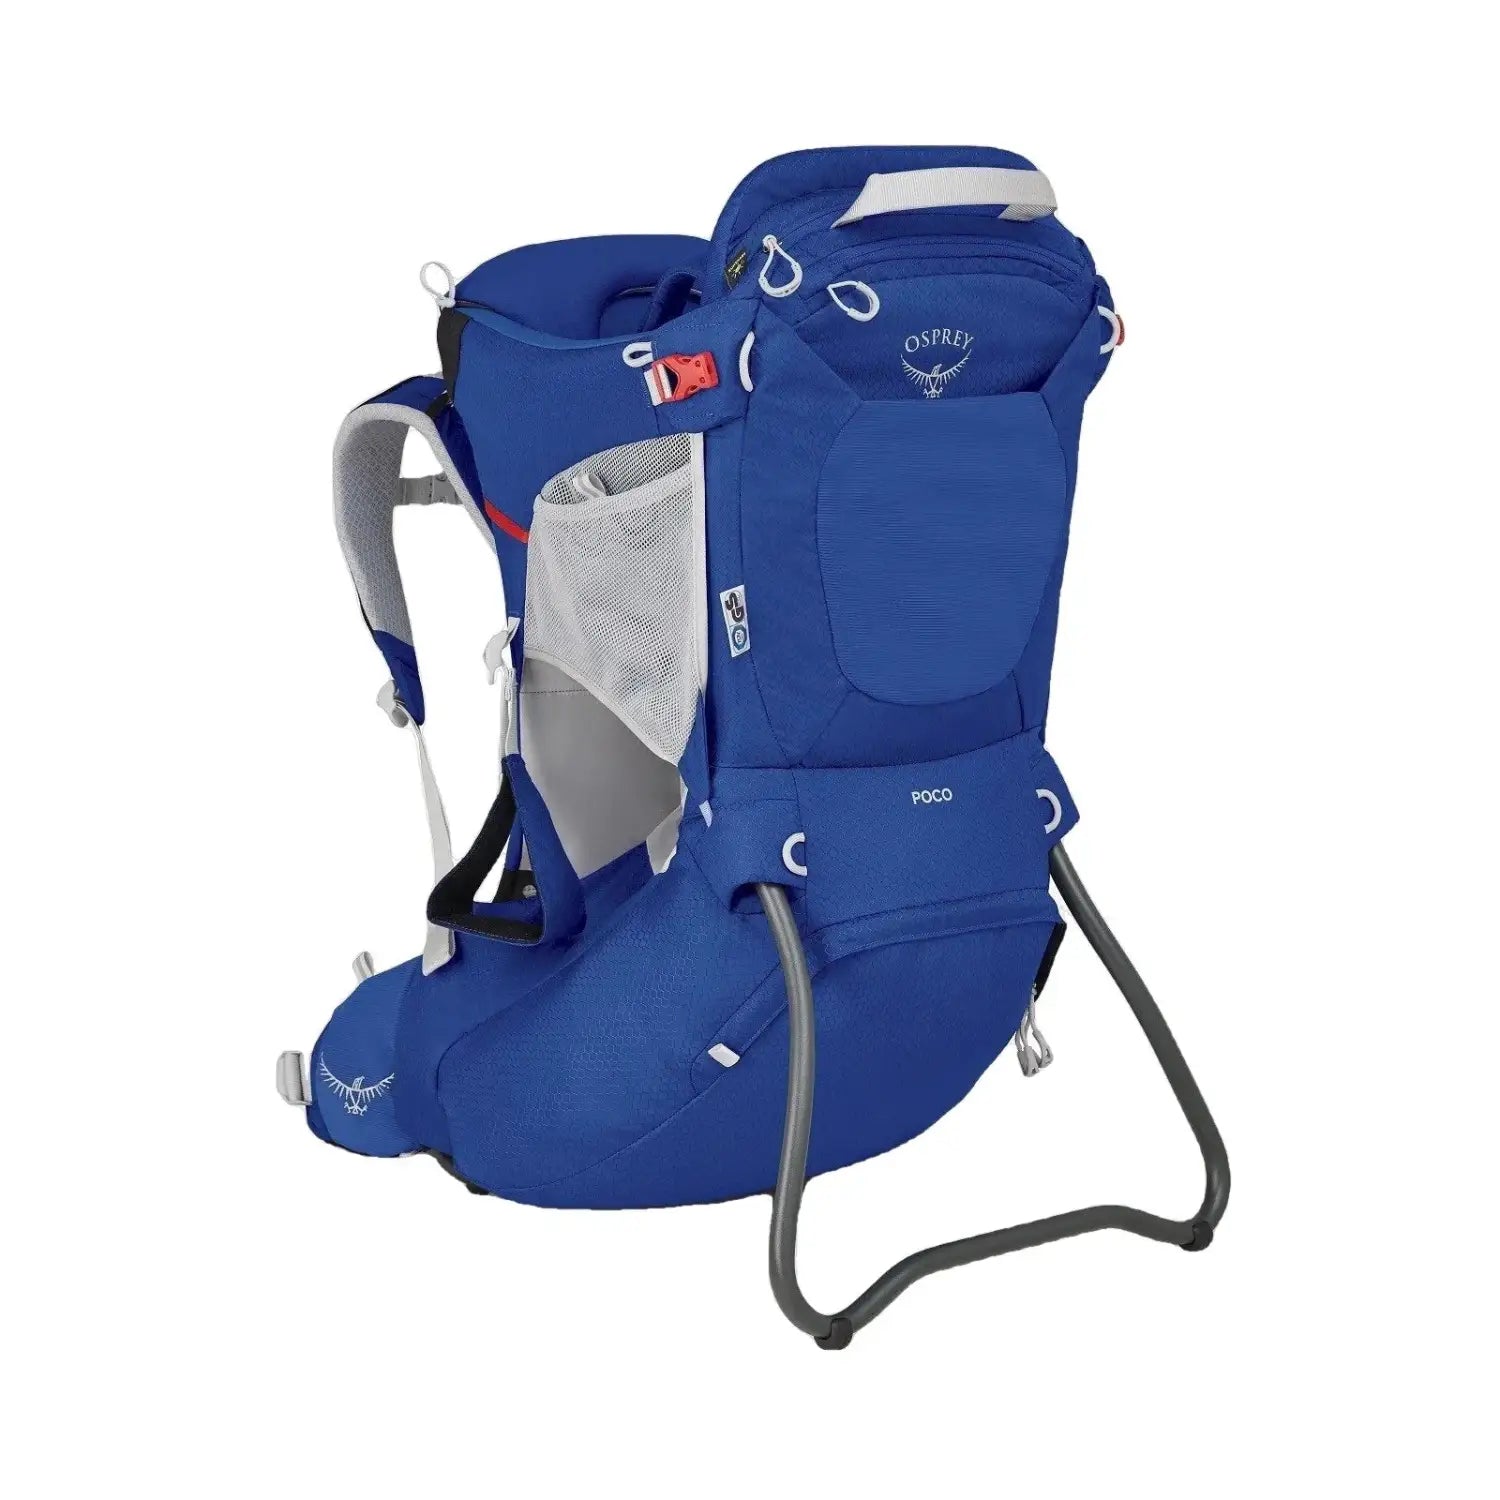 Osprey POCO® Child Carrier shown in Blue Sky color option. Back view.